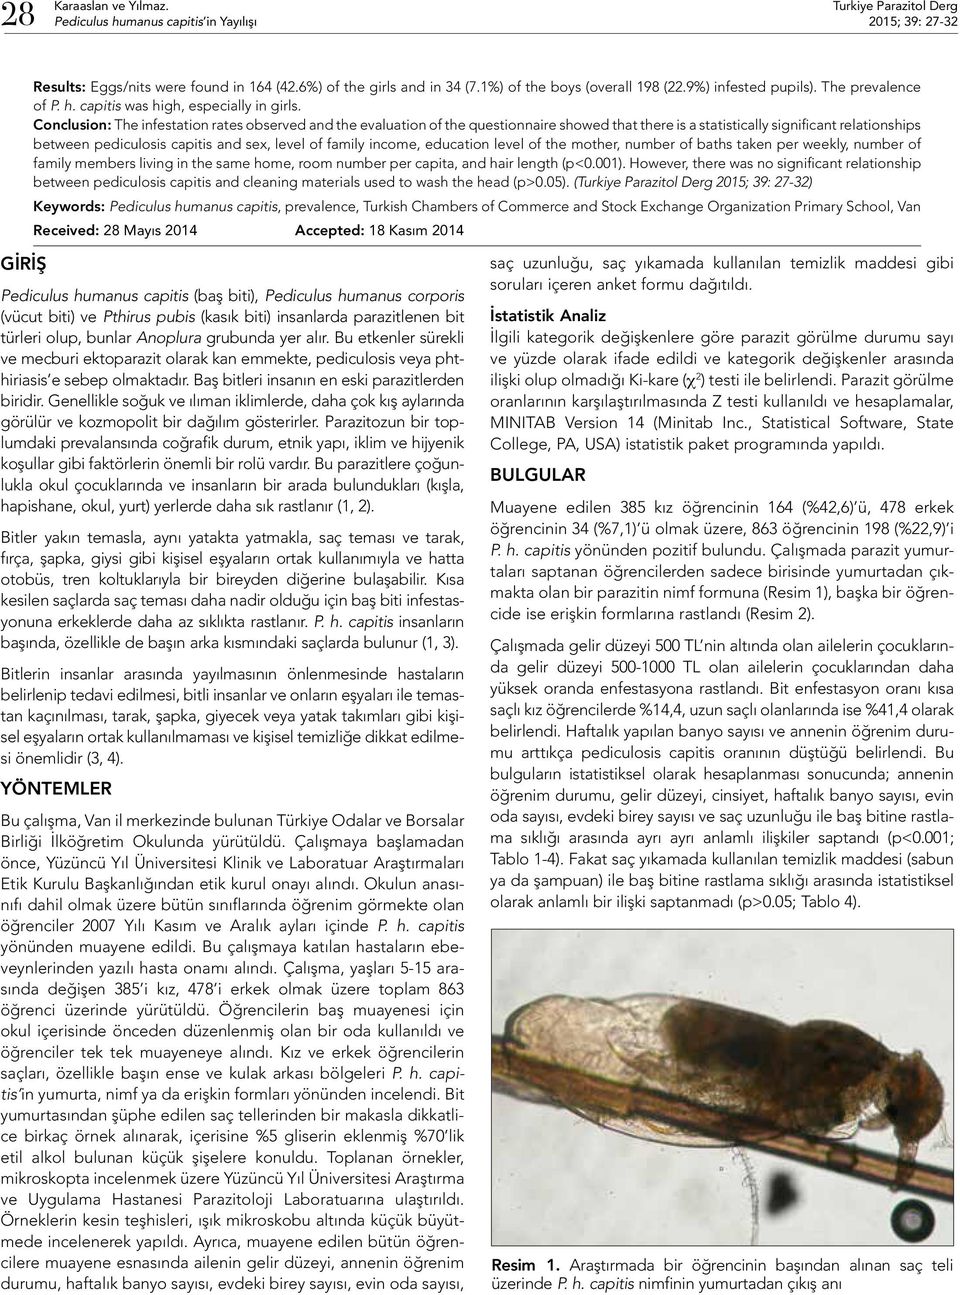 Conclusion: The infestation rates observed and the evaluation of the questionnaire showed that there is a statistically significant relationships between pediculosis capitis and sex, level of family